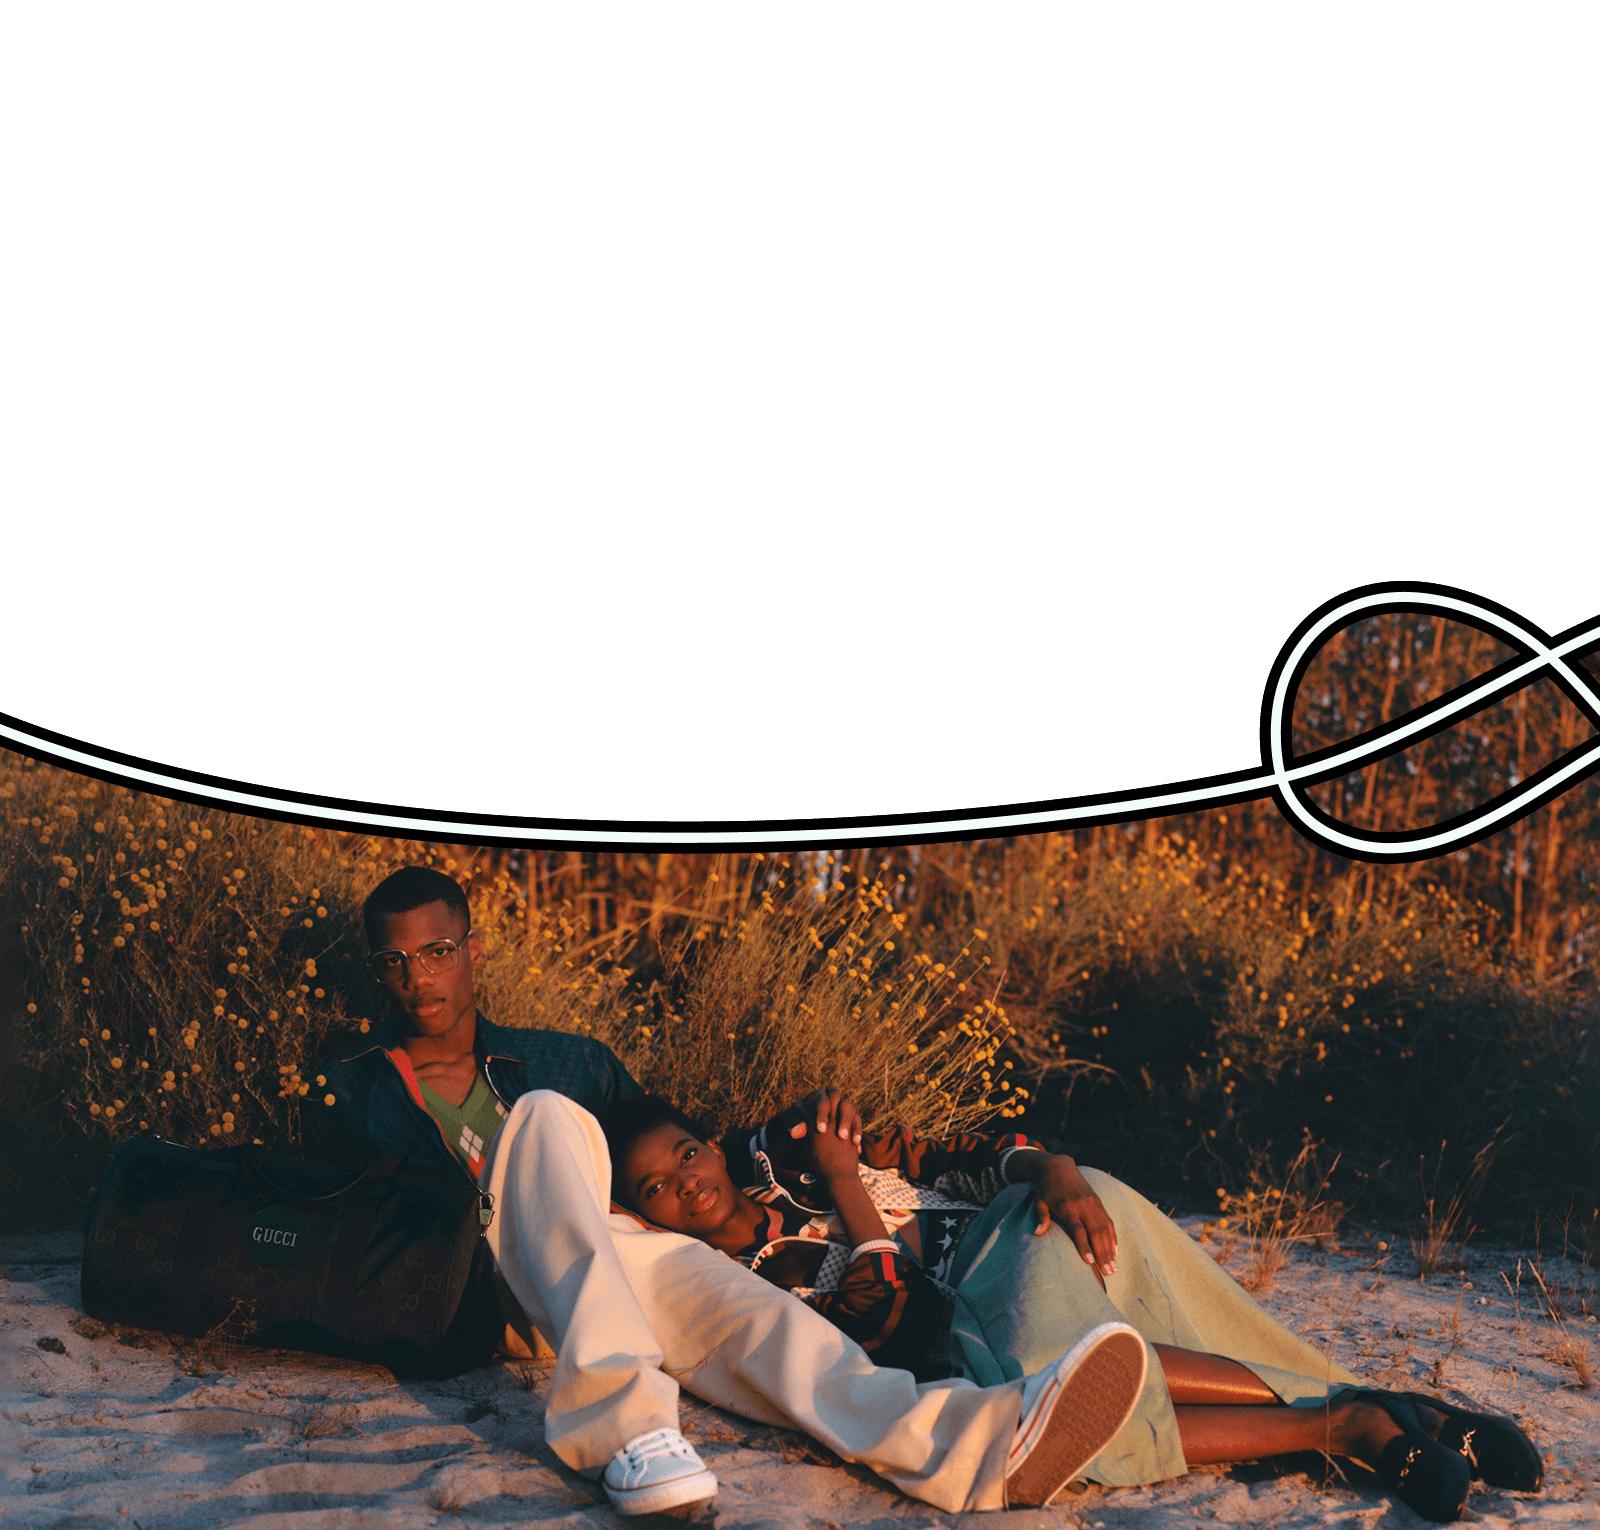 Next to a large regenerated nylon black GG duffle bag, a young Black man reclines on a sandy dune with his arm around the shoulder of a young Black woman, lying with her head resting on his hip. The top of the frame is filled with dense pine trees in the distance and there are shrubs with small yellow flowers directly behind them. He is wearing a navy track jacket over a green argyle sweater, with ivory pants and white sneakers. She is wearing a multicolor track jacket and sweater with navy loafers and a sea foam green skirt.